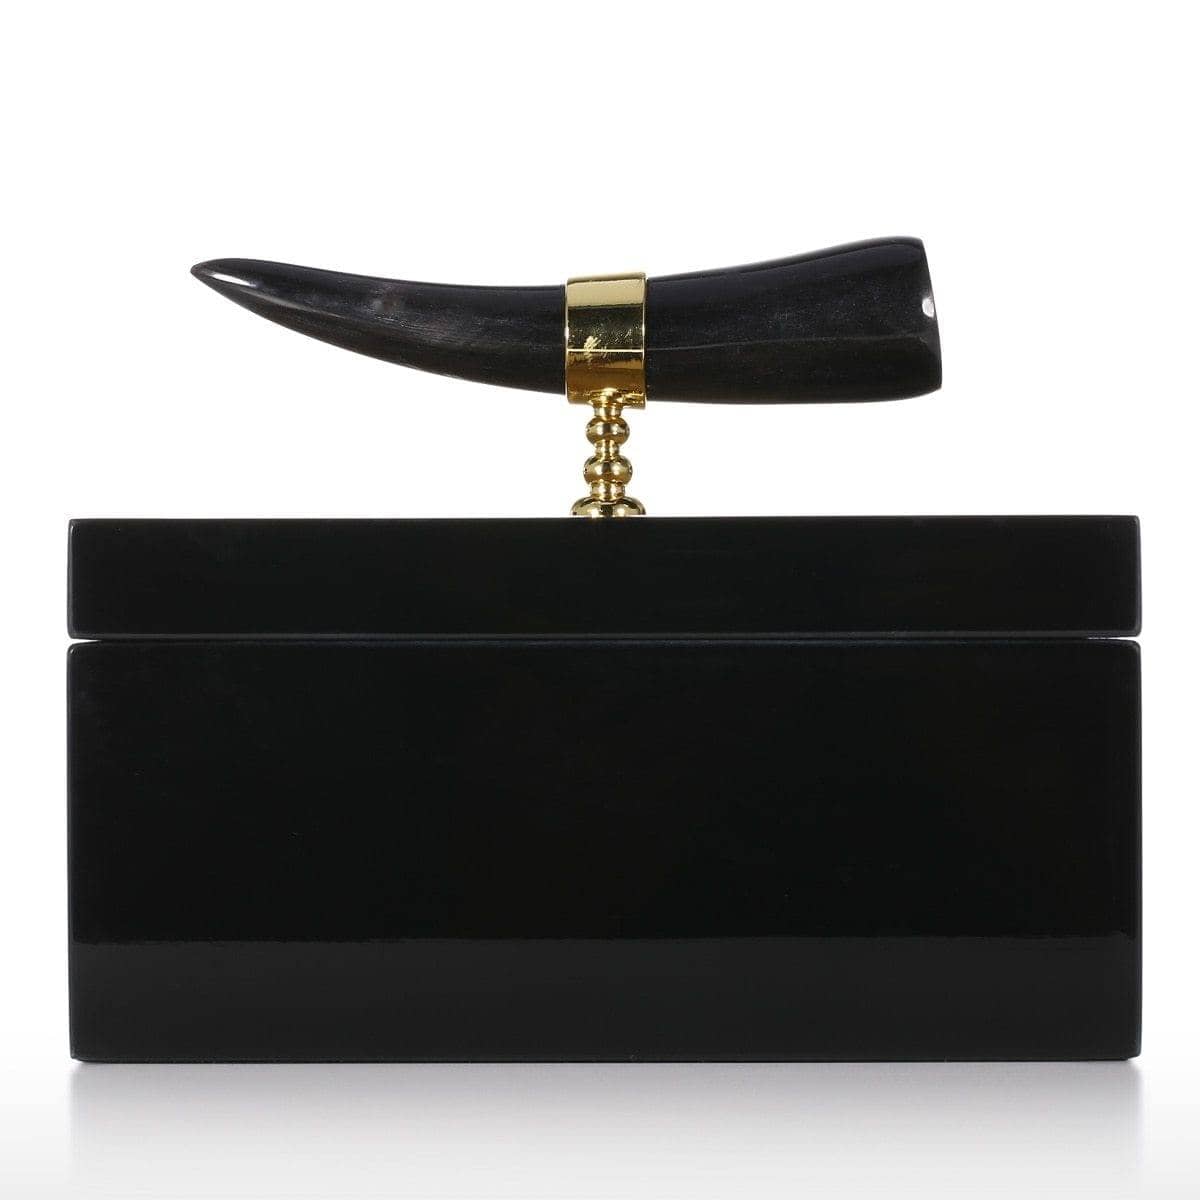 Horn Stripe Jewelry Organizer: Stylish and Chic Storage Solution for Accessories